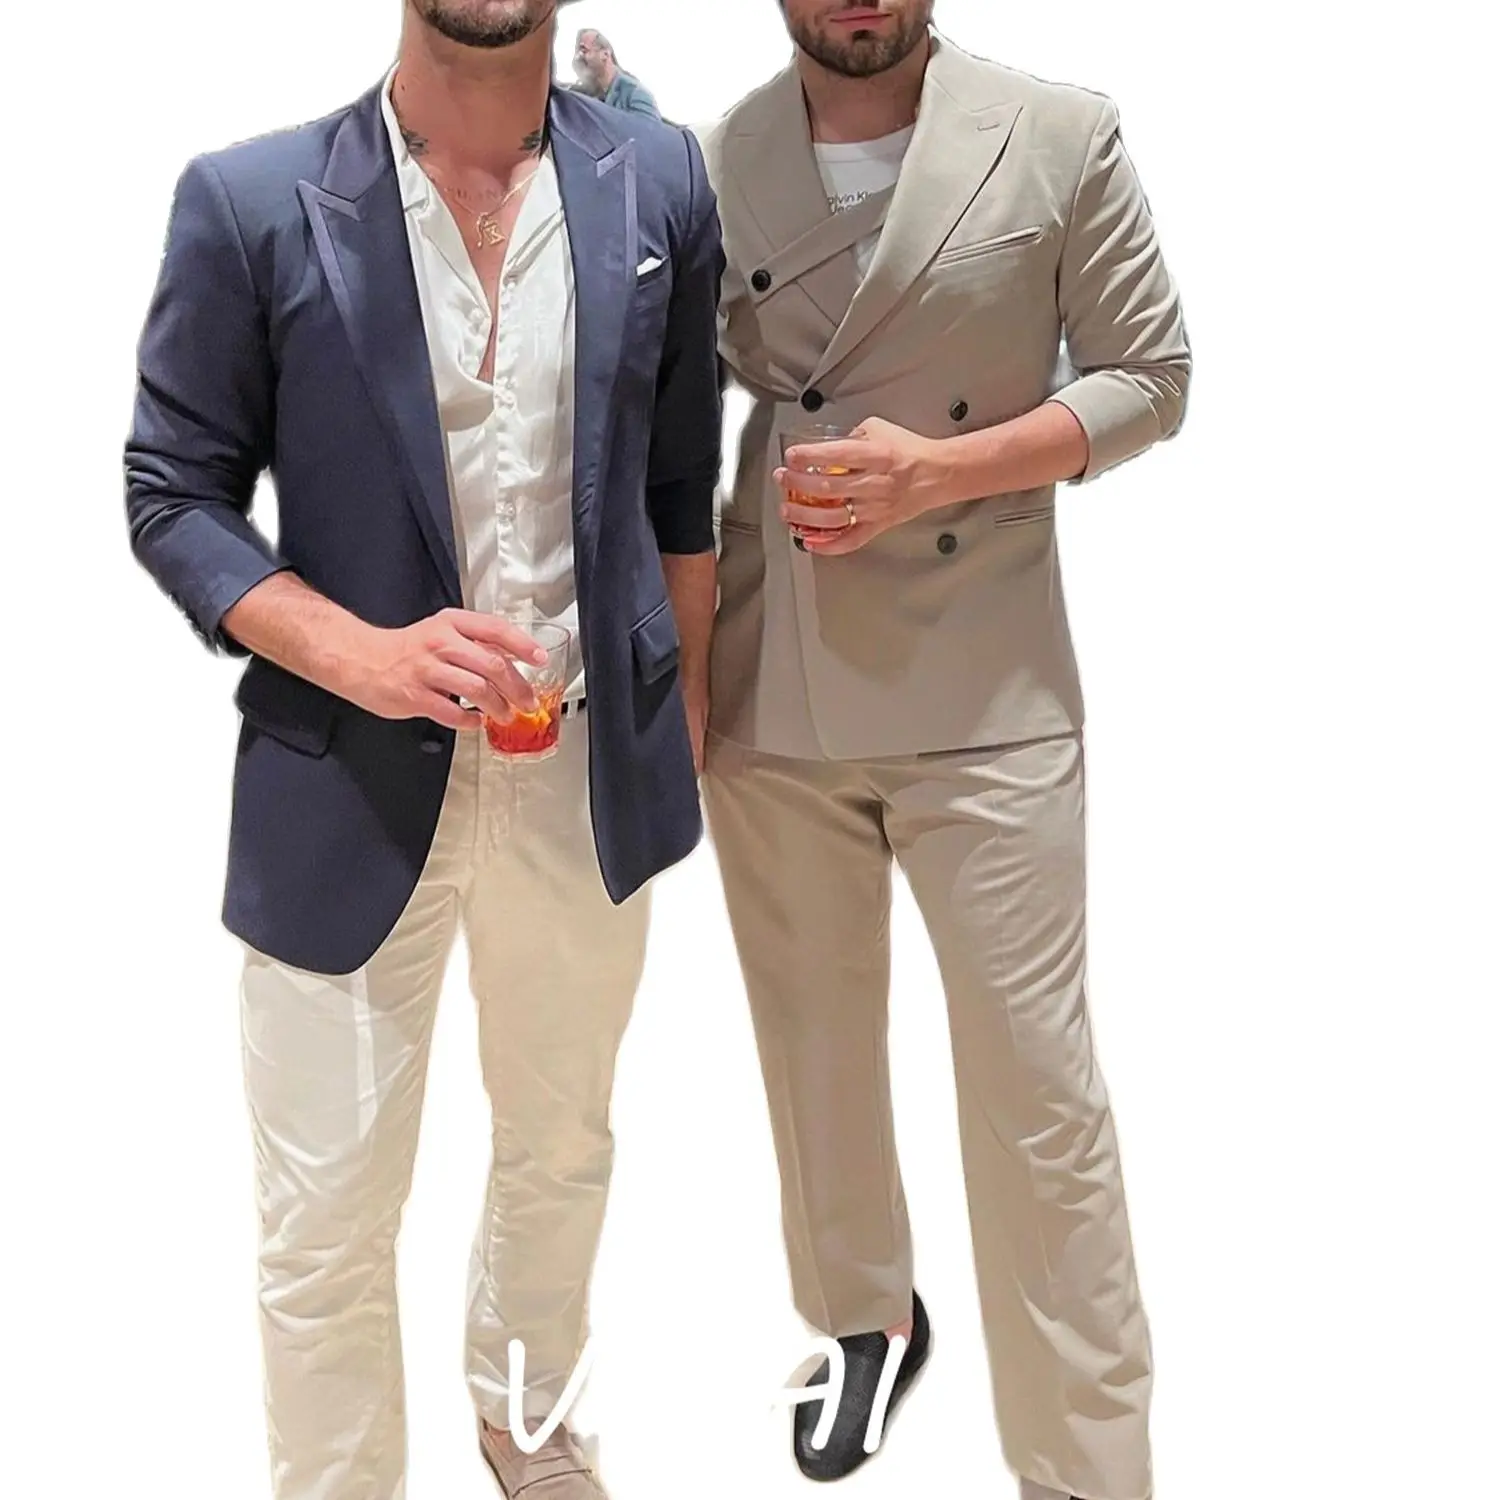 

Newest Men Suits 2 Pieces Peaked Lapel Double Breasted Blazer Sets terno masculino completo Wedding Party Male Suit Jacket+Pant